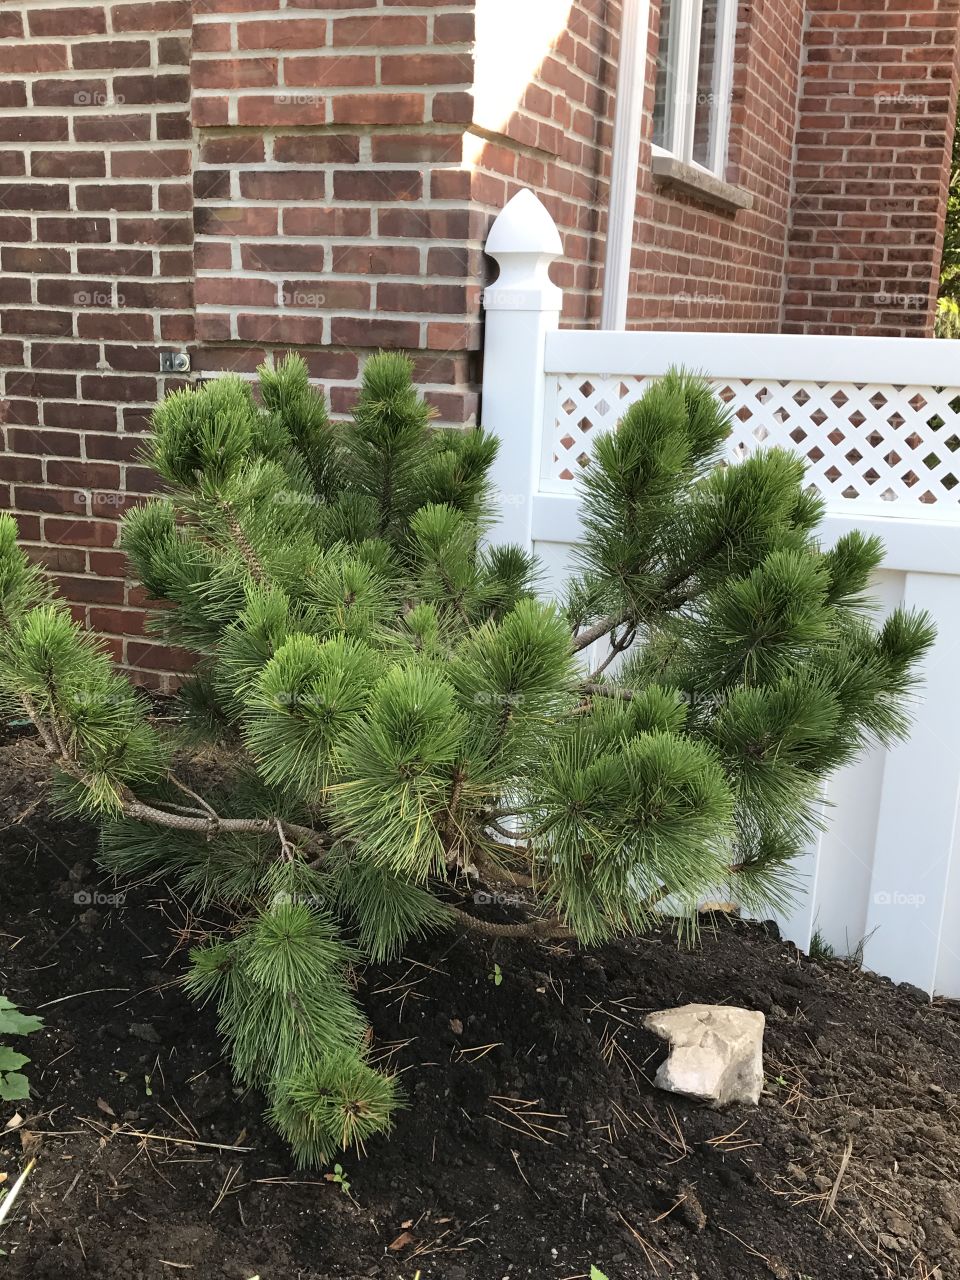 Japanese Black Pine immediately following planting. The shape of the branches makes it unusually eye-catching